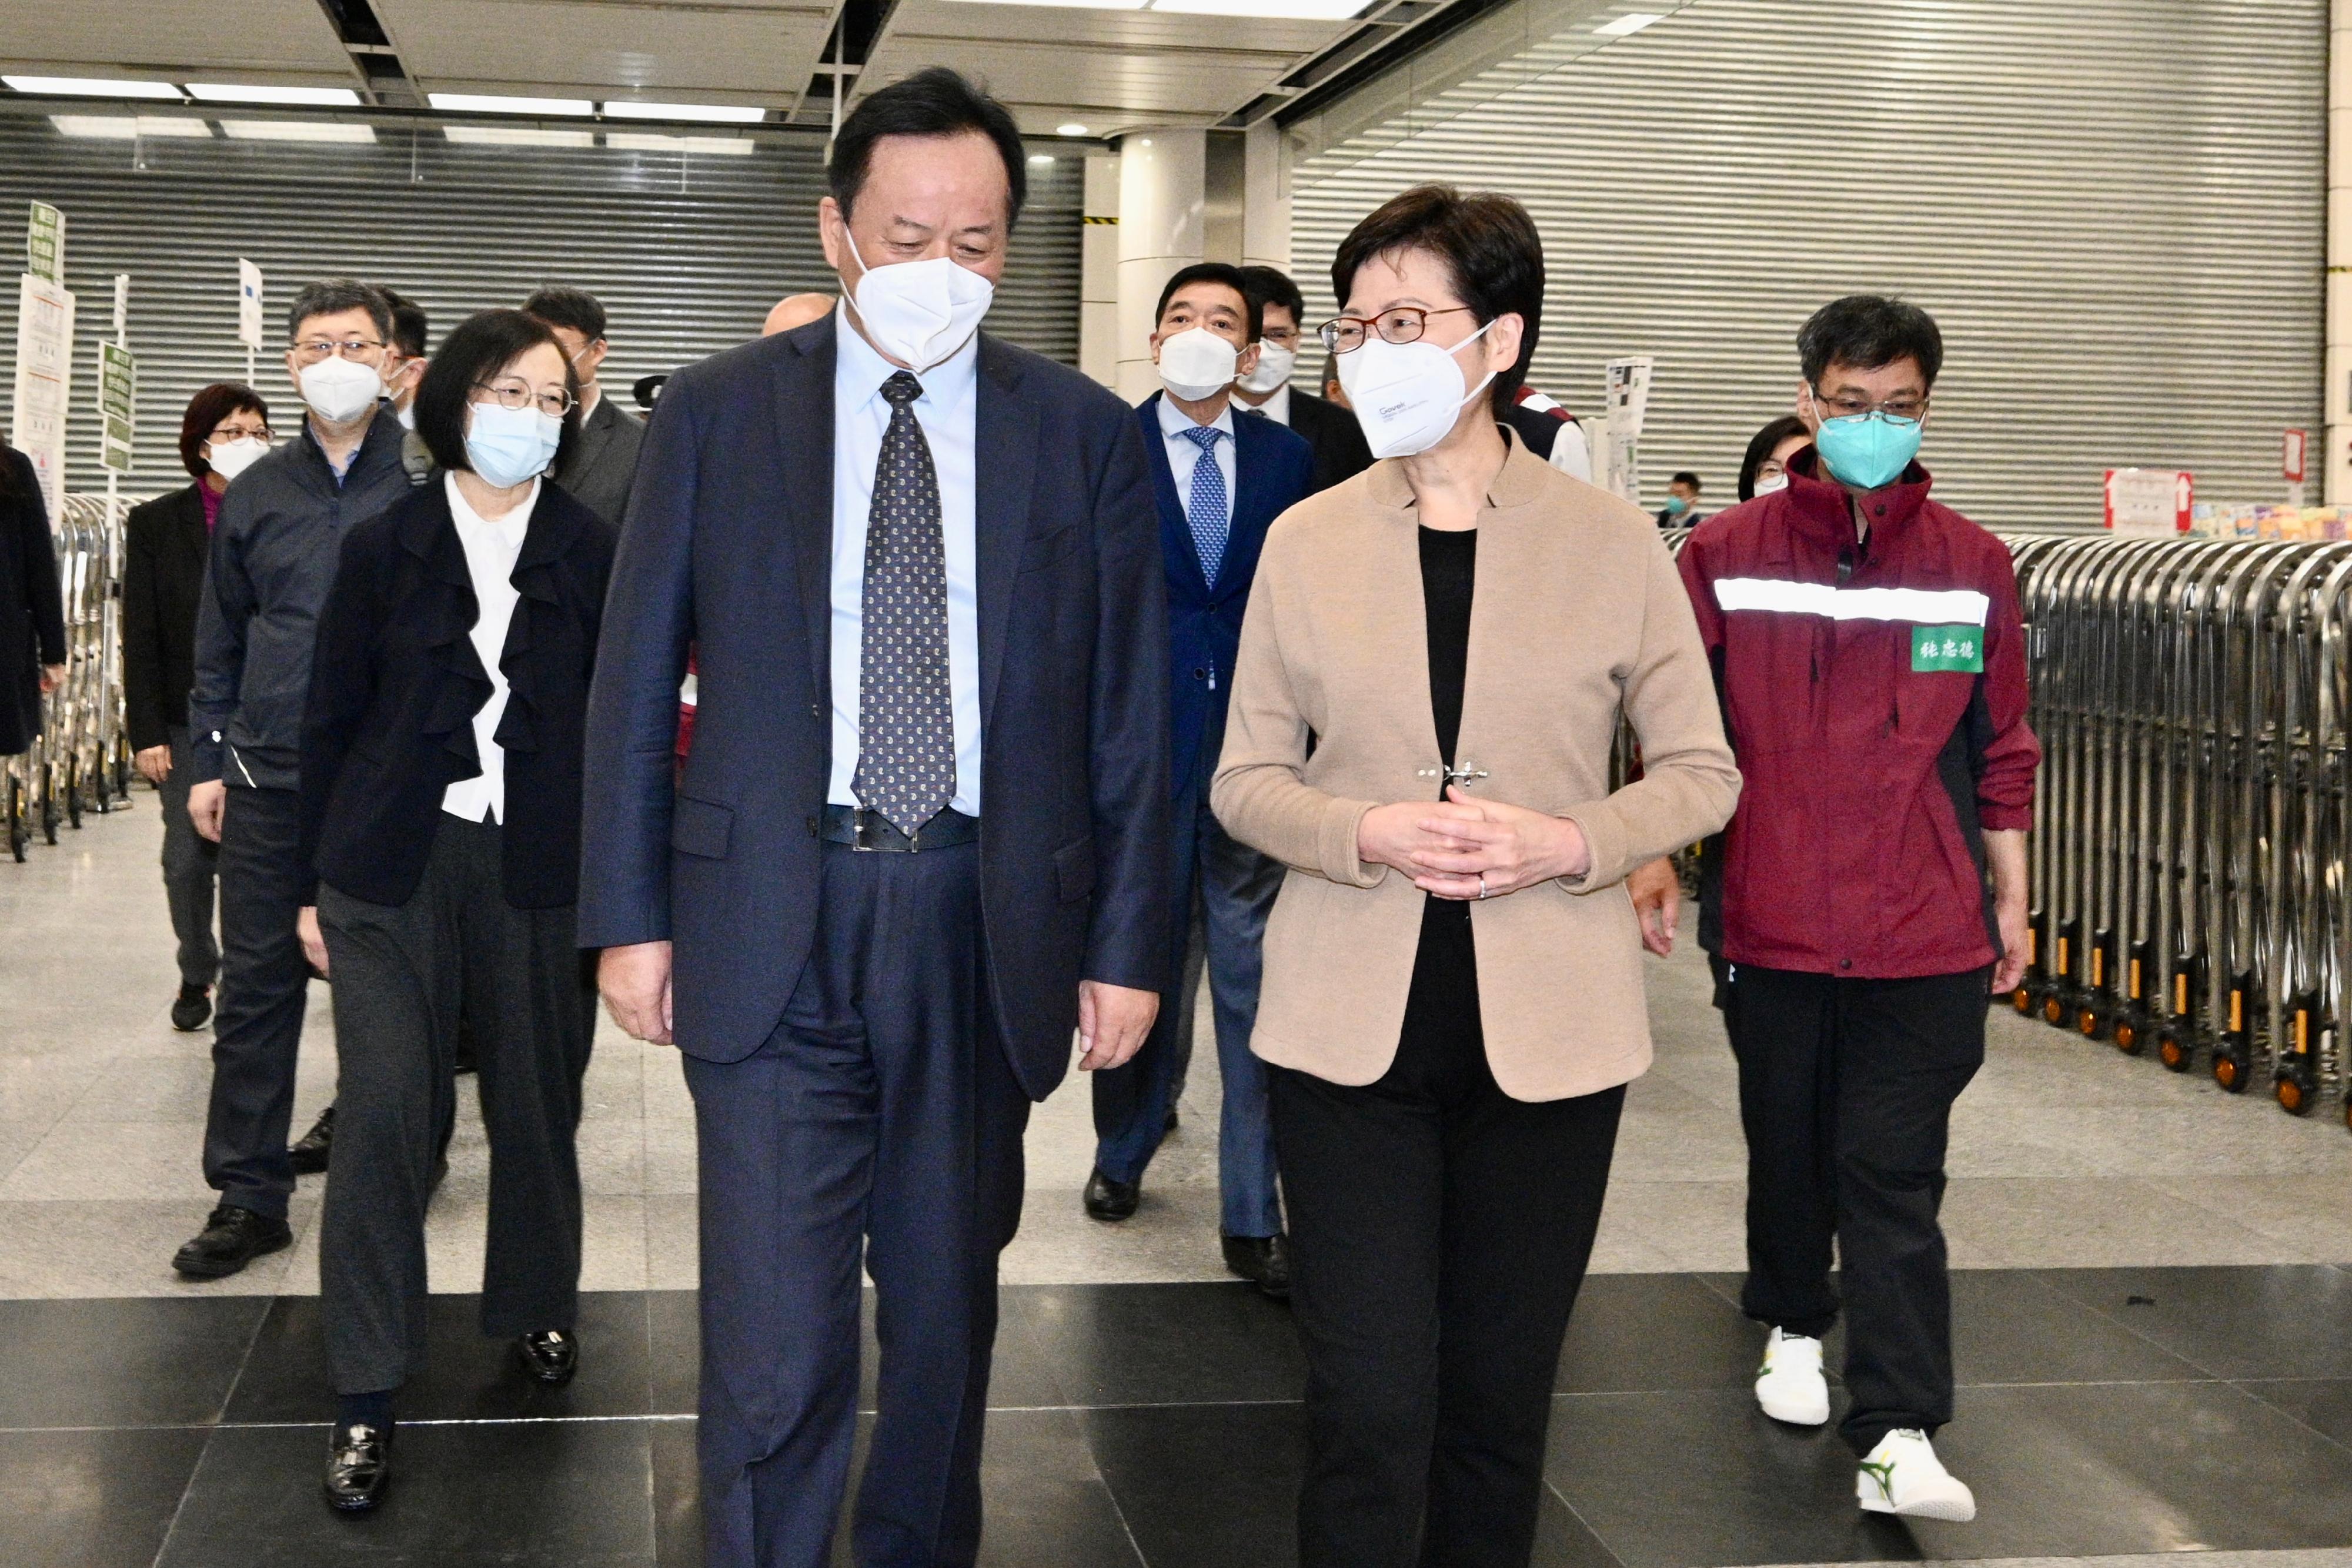 The Chief Executive, Mrs Carrie Lam, welcomed the Chinese medicine expert group at the Shenzhen Bay Port today (March 29). The experts were arranged by the Central Authorities to support the anti-epidemic work in Hong Kong. Photo shows Mrs Lam (front, right) chatting with the group leader, academician of the Chinese Academy of Sciences Mr Tong Xiaolin (front, left).